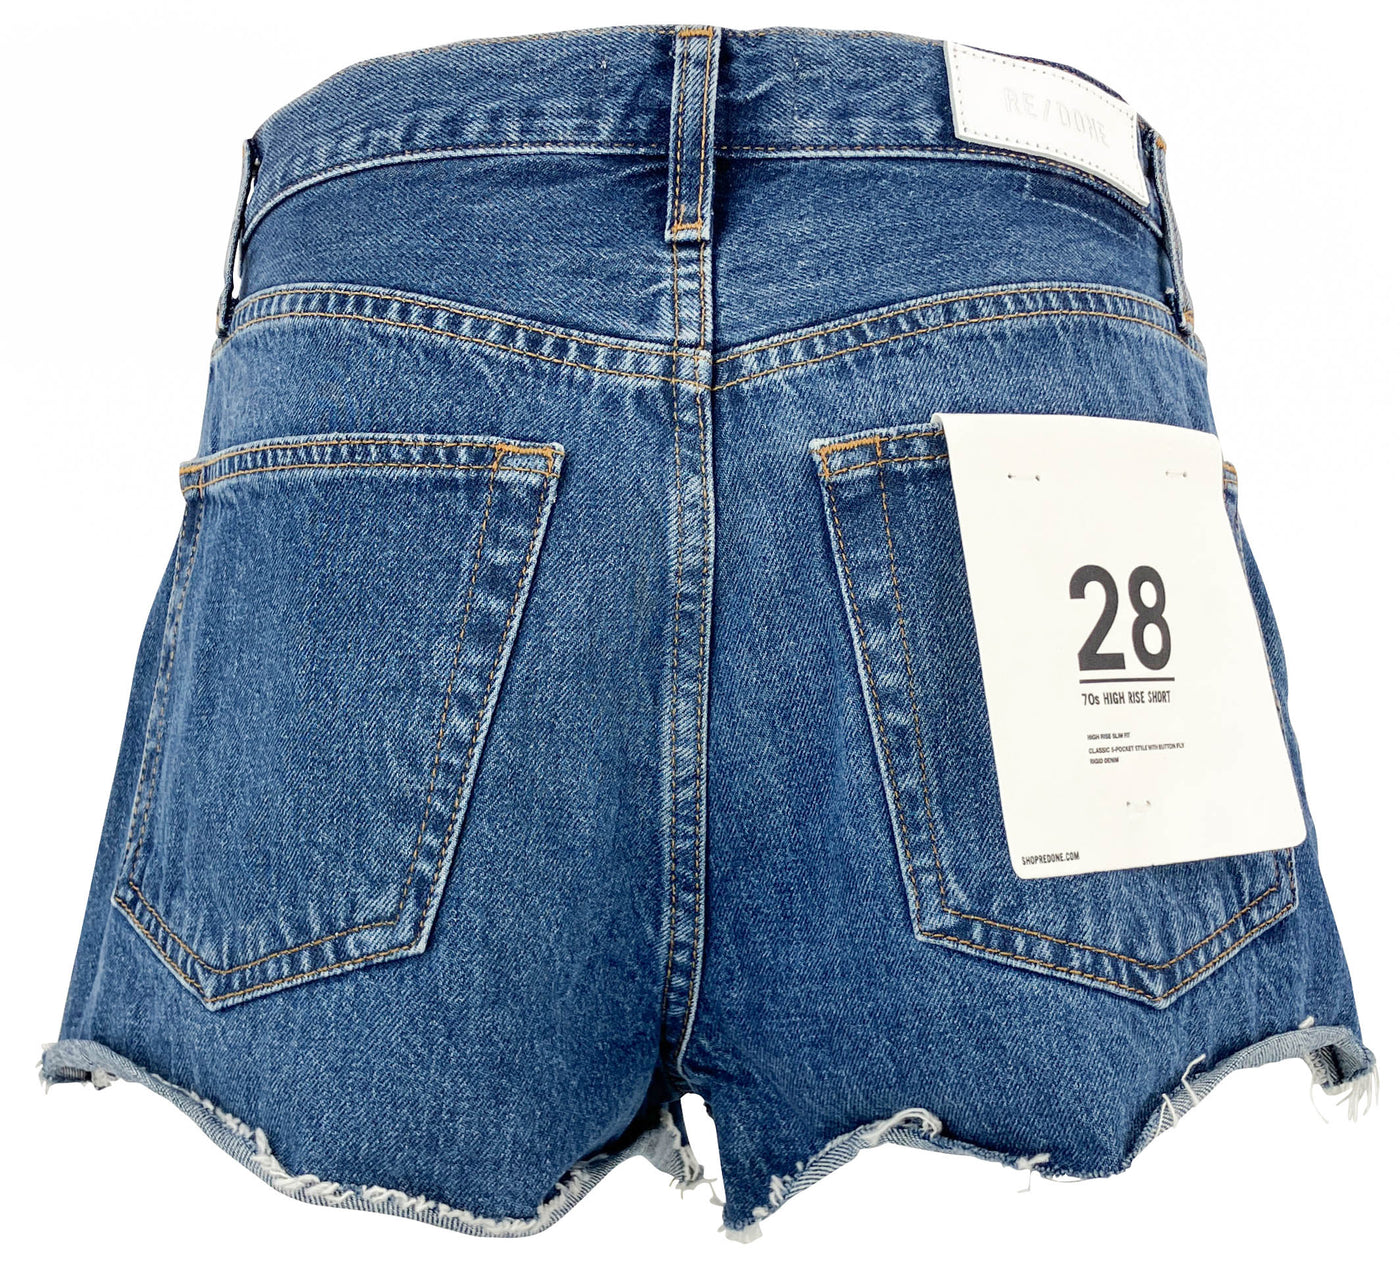 RE/DONE 70s High Rise Denim Shorts in High Tide - Discounts on RE/DONE at UAL